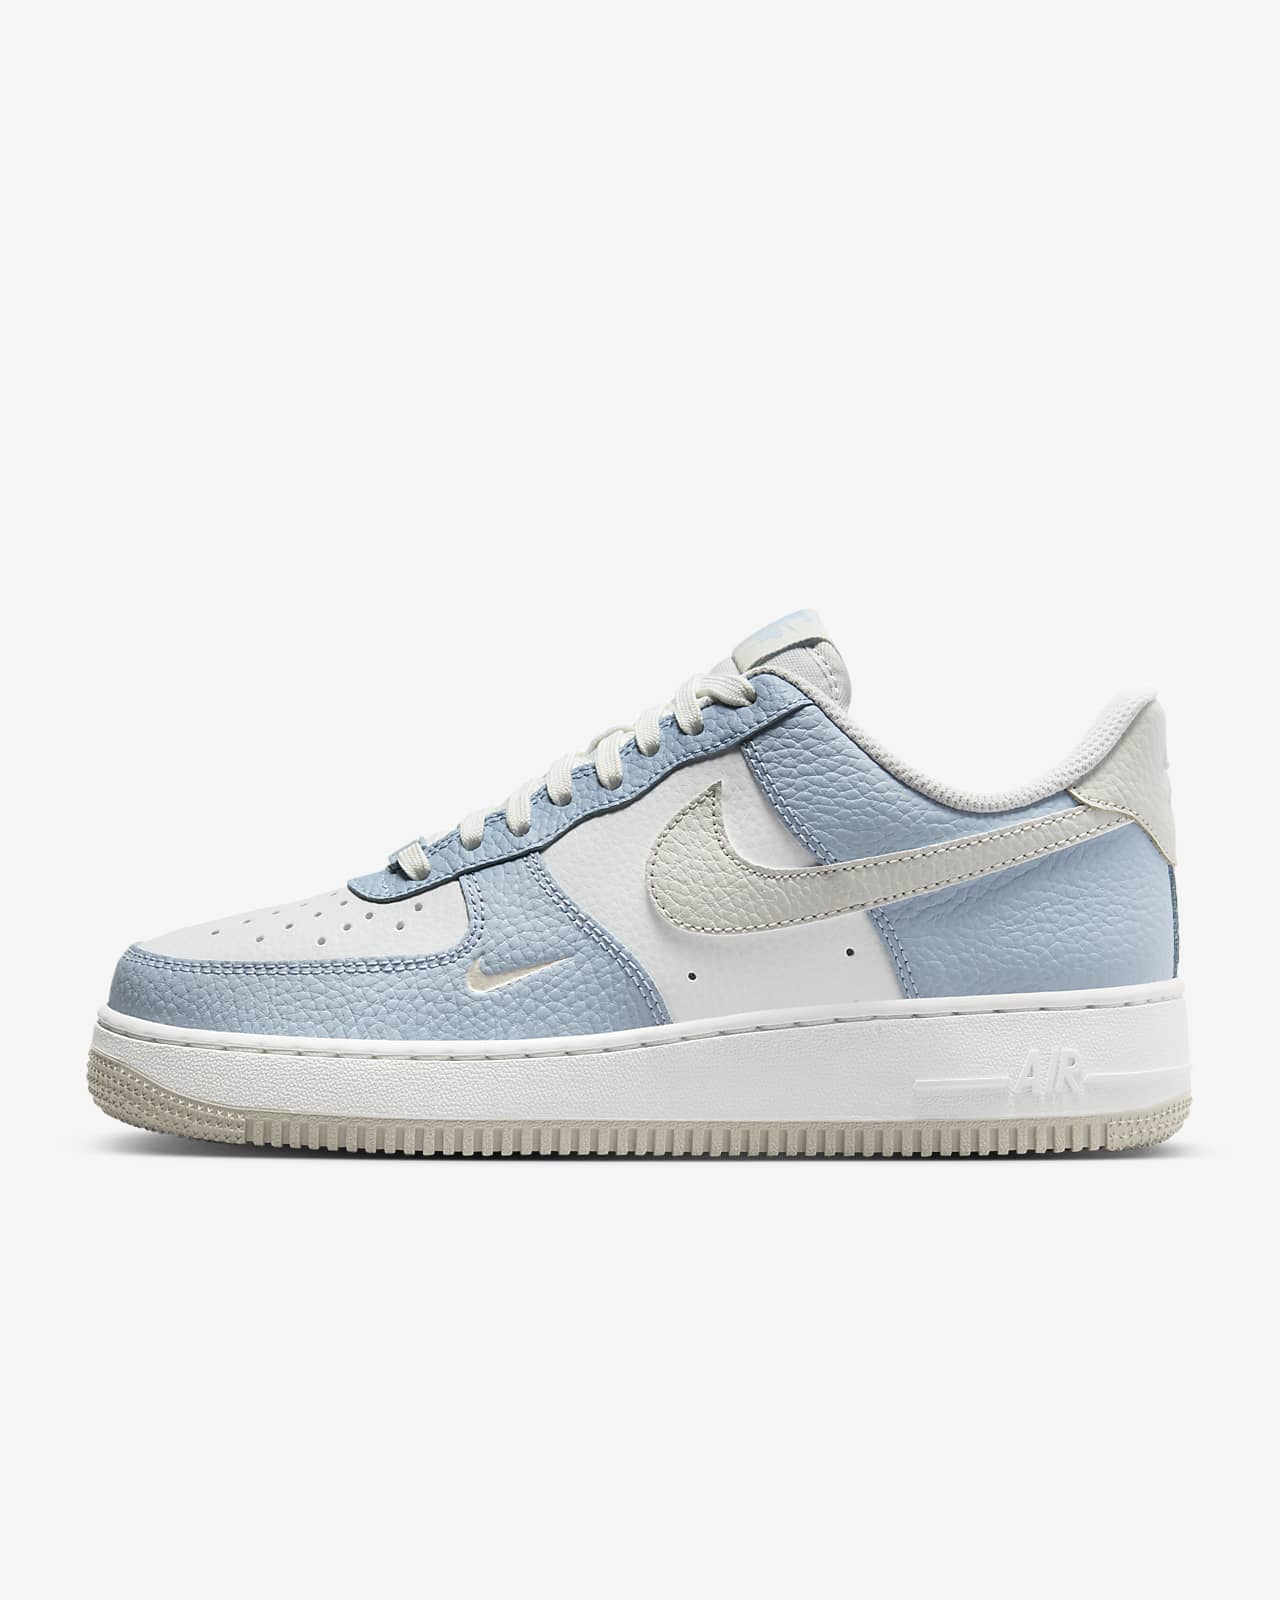 Chaussure Nike Air Force 1 '07 pour Femme